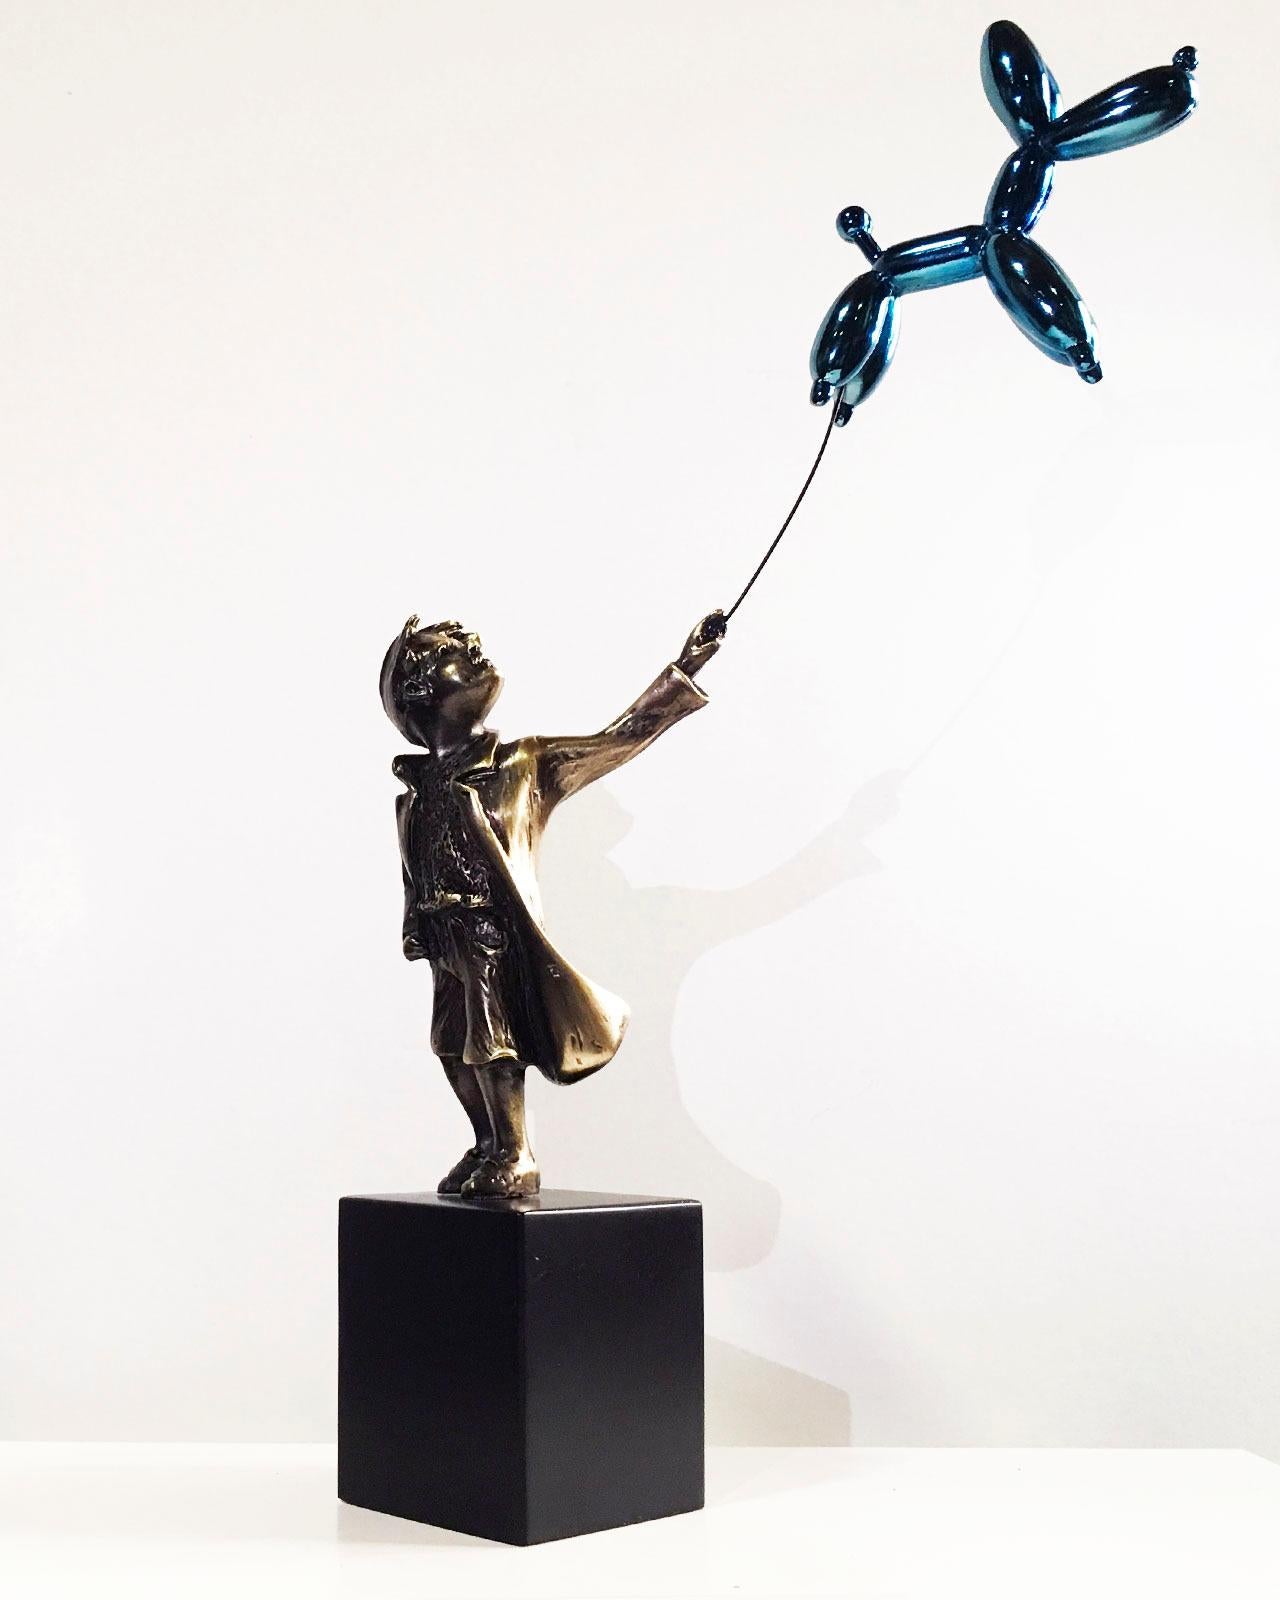 Street Art Sculpture "Child with balloon dog" by Miguel Guía.
This sculpture is made by lost wax bronze casting.
Limited edition of 299 works.
Although the required time to deliver a shipment is usually between 3 and 10 days please do not hesitate